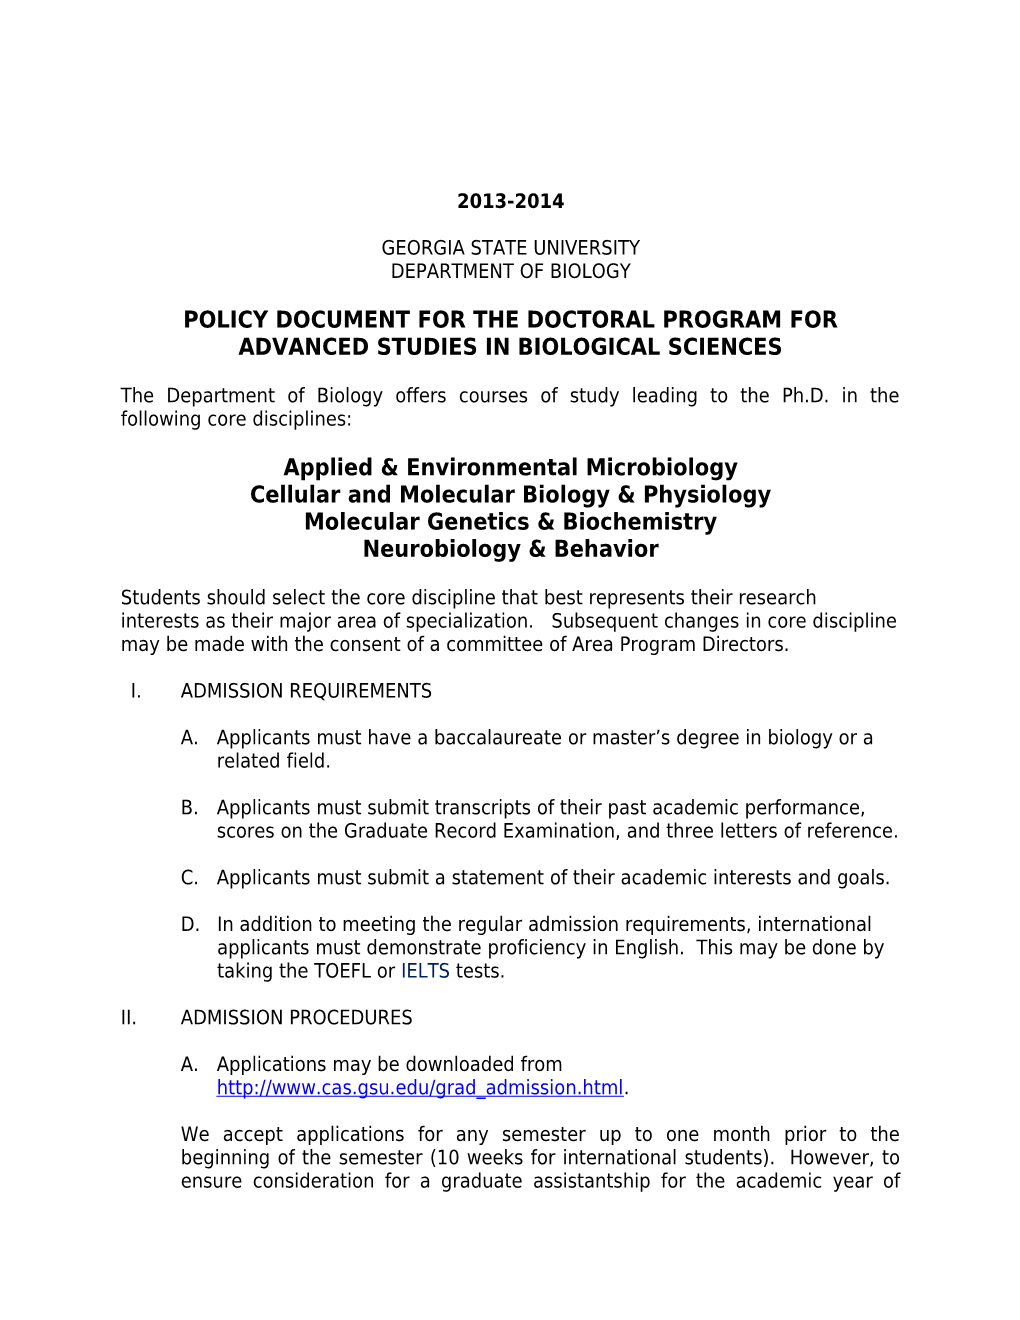 Policy Document for the Doctoral Program For